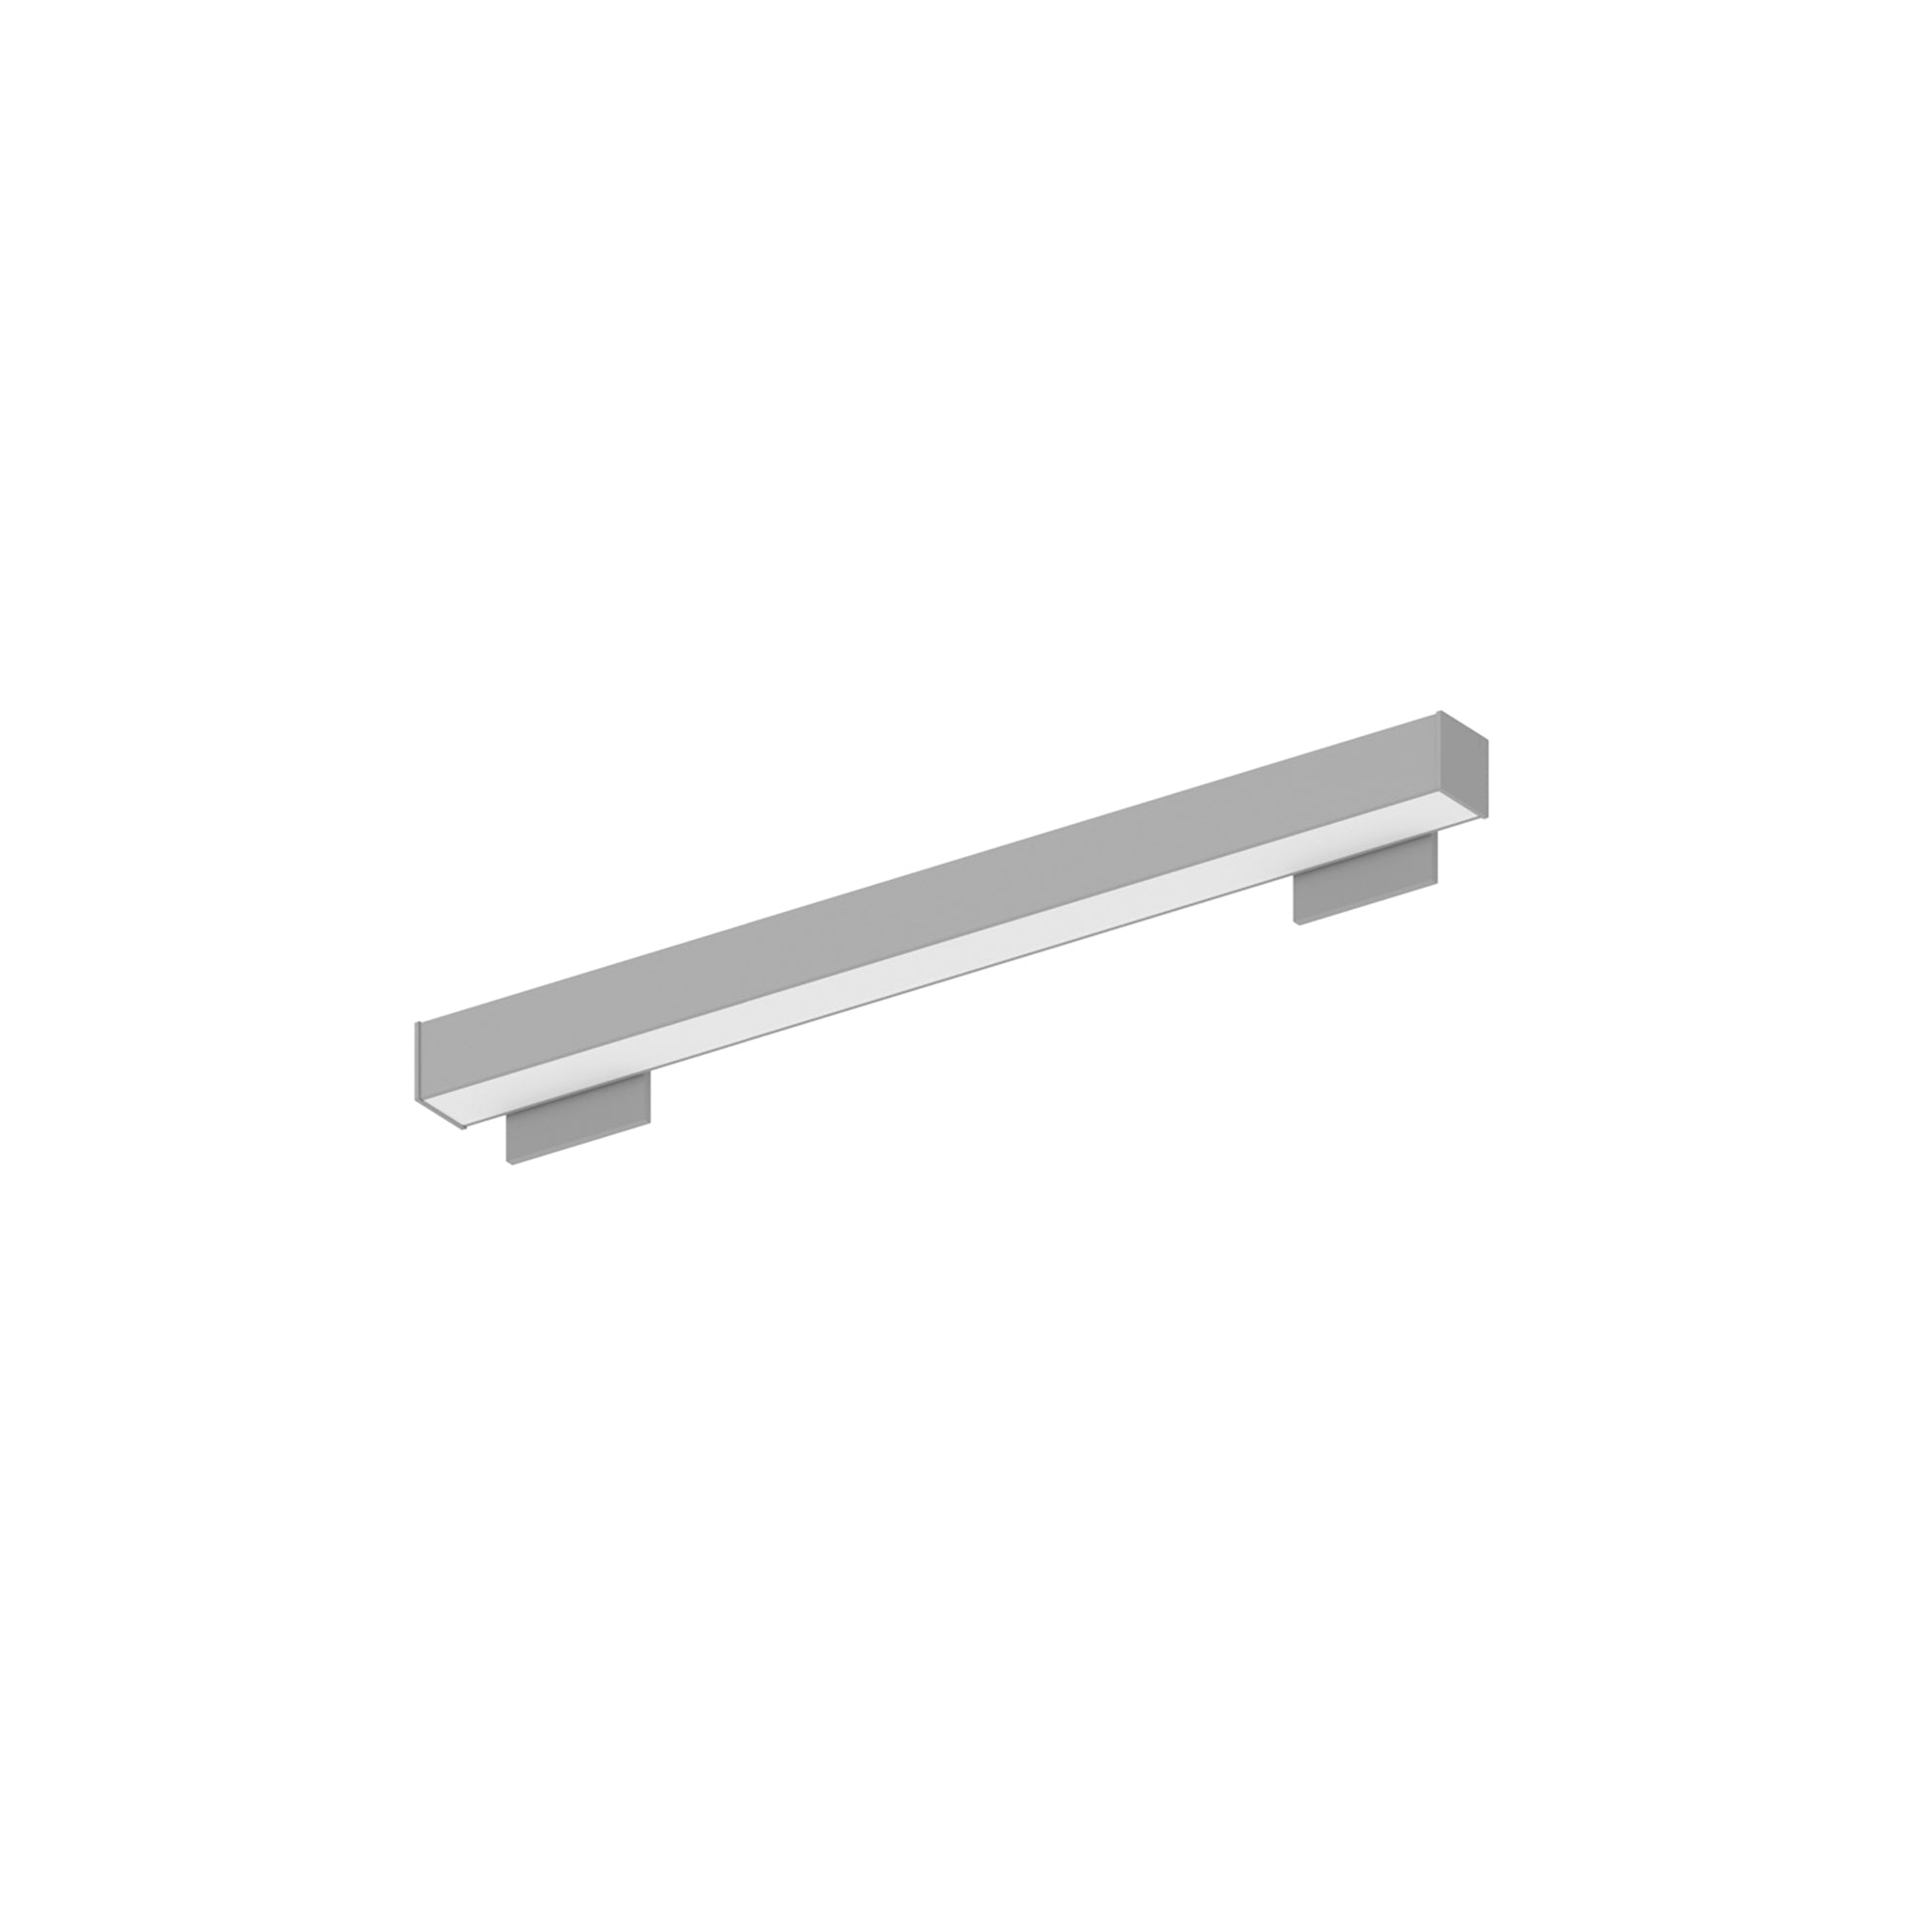 Nora Lighting NWLIN-21030A/L4P-R4 - Linear - 2' L-Line LED Wall Mount Linear, 2100lm / 3000K, 4 Inchx4 Inch Left Plate & 4 Inchx4 Inch Right Plate, Left Power Feed, Aluminum Finish